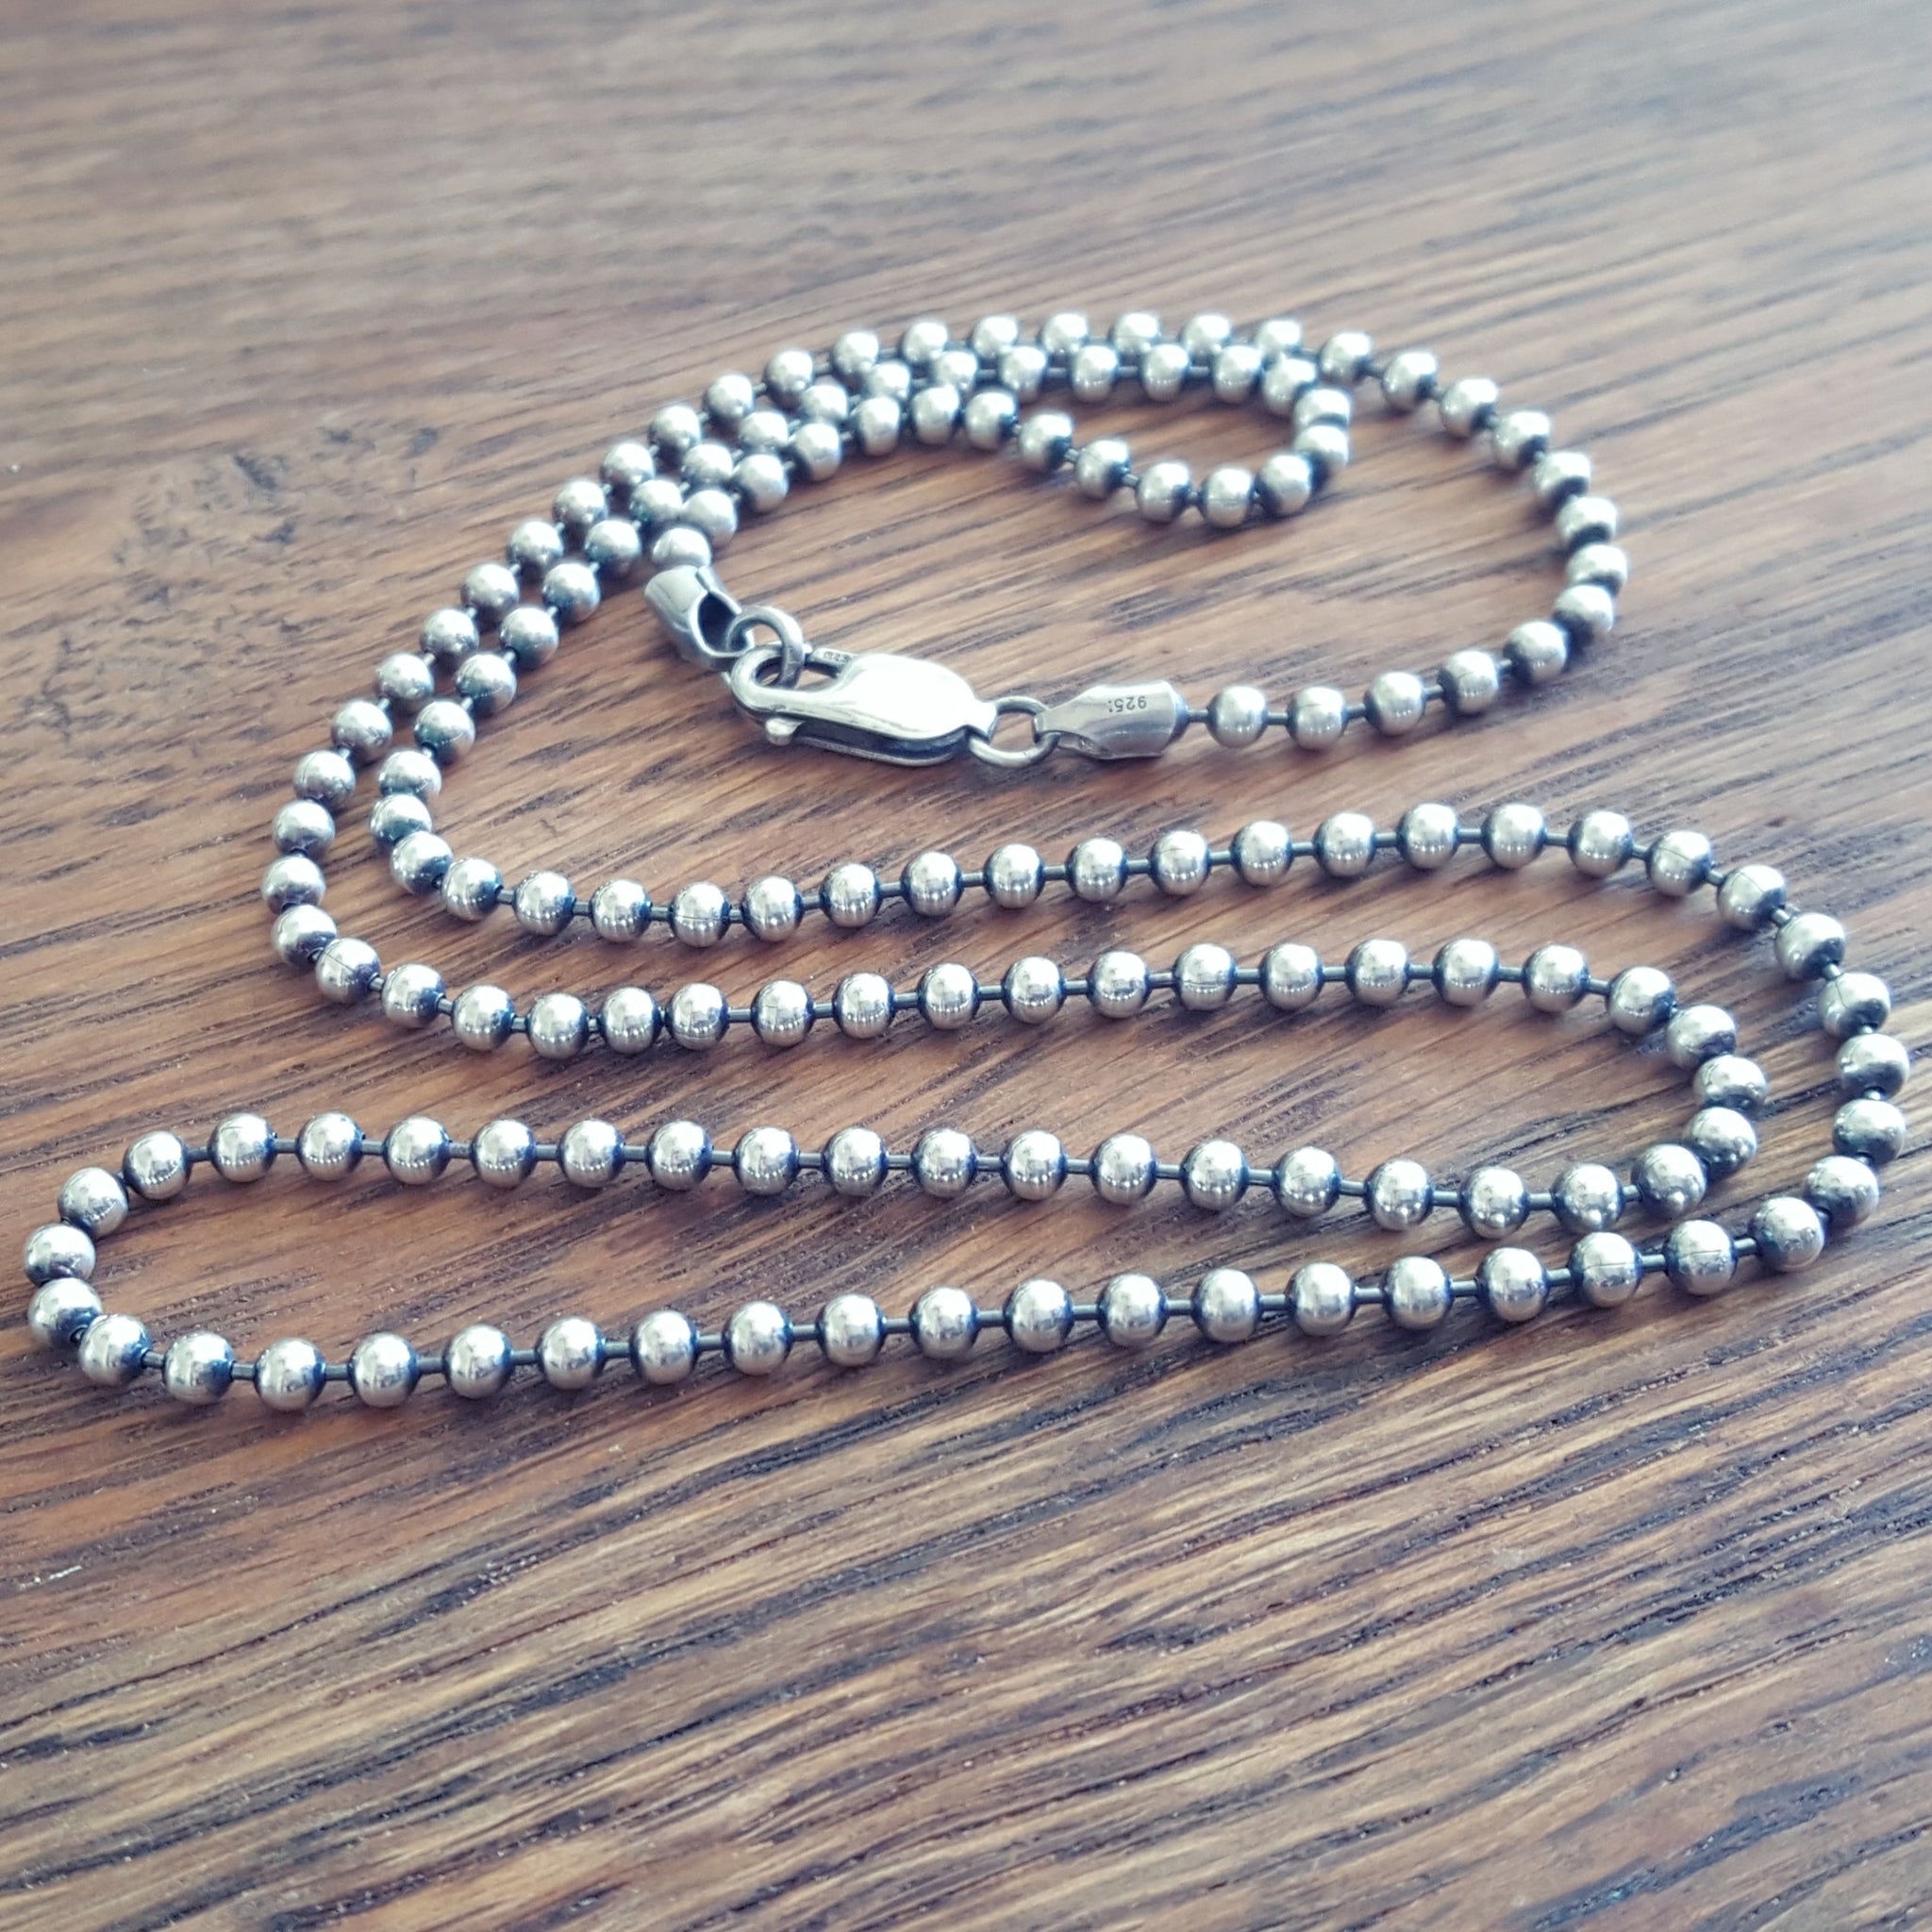 3mm Sterling Silver Bead Ball Chain Bracelet or Necklace 22 / Oxidized Darker